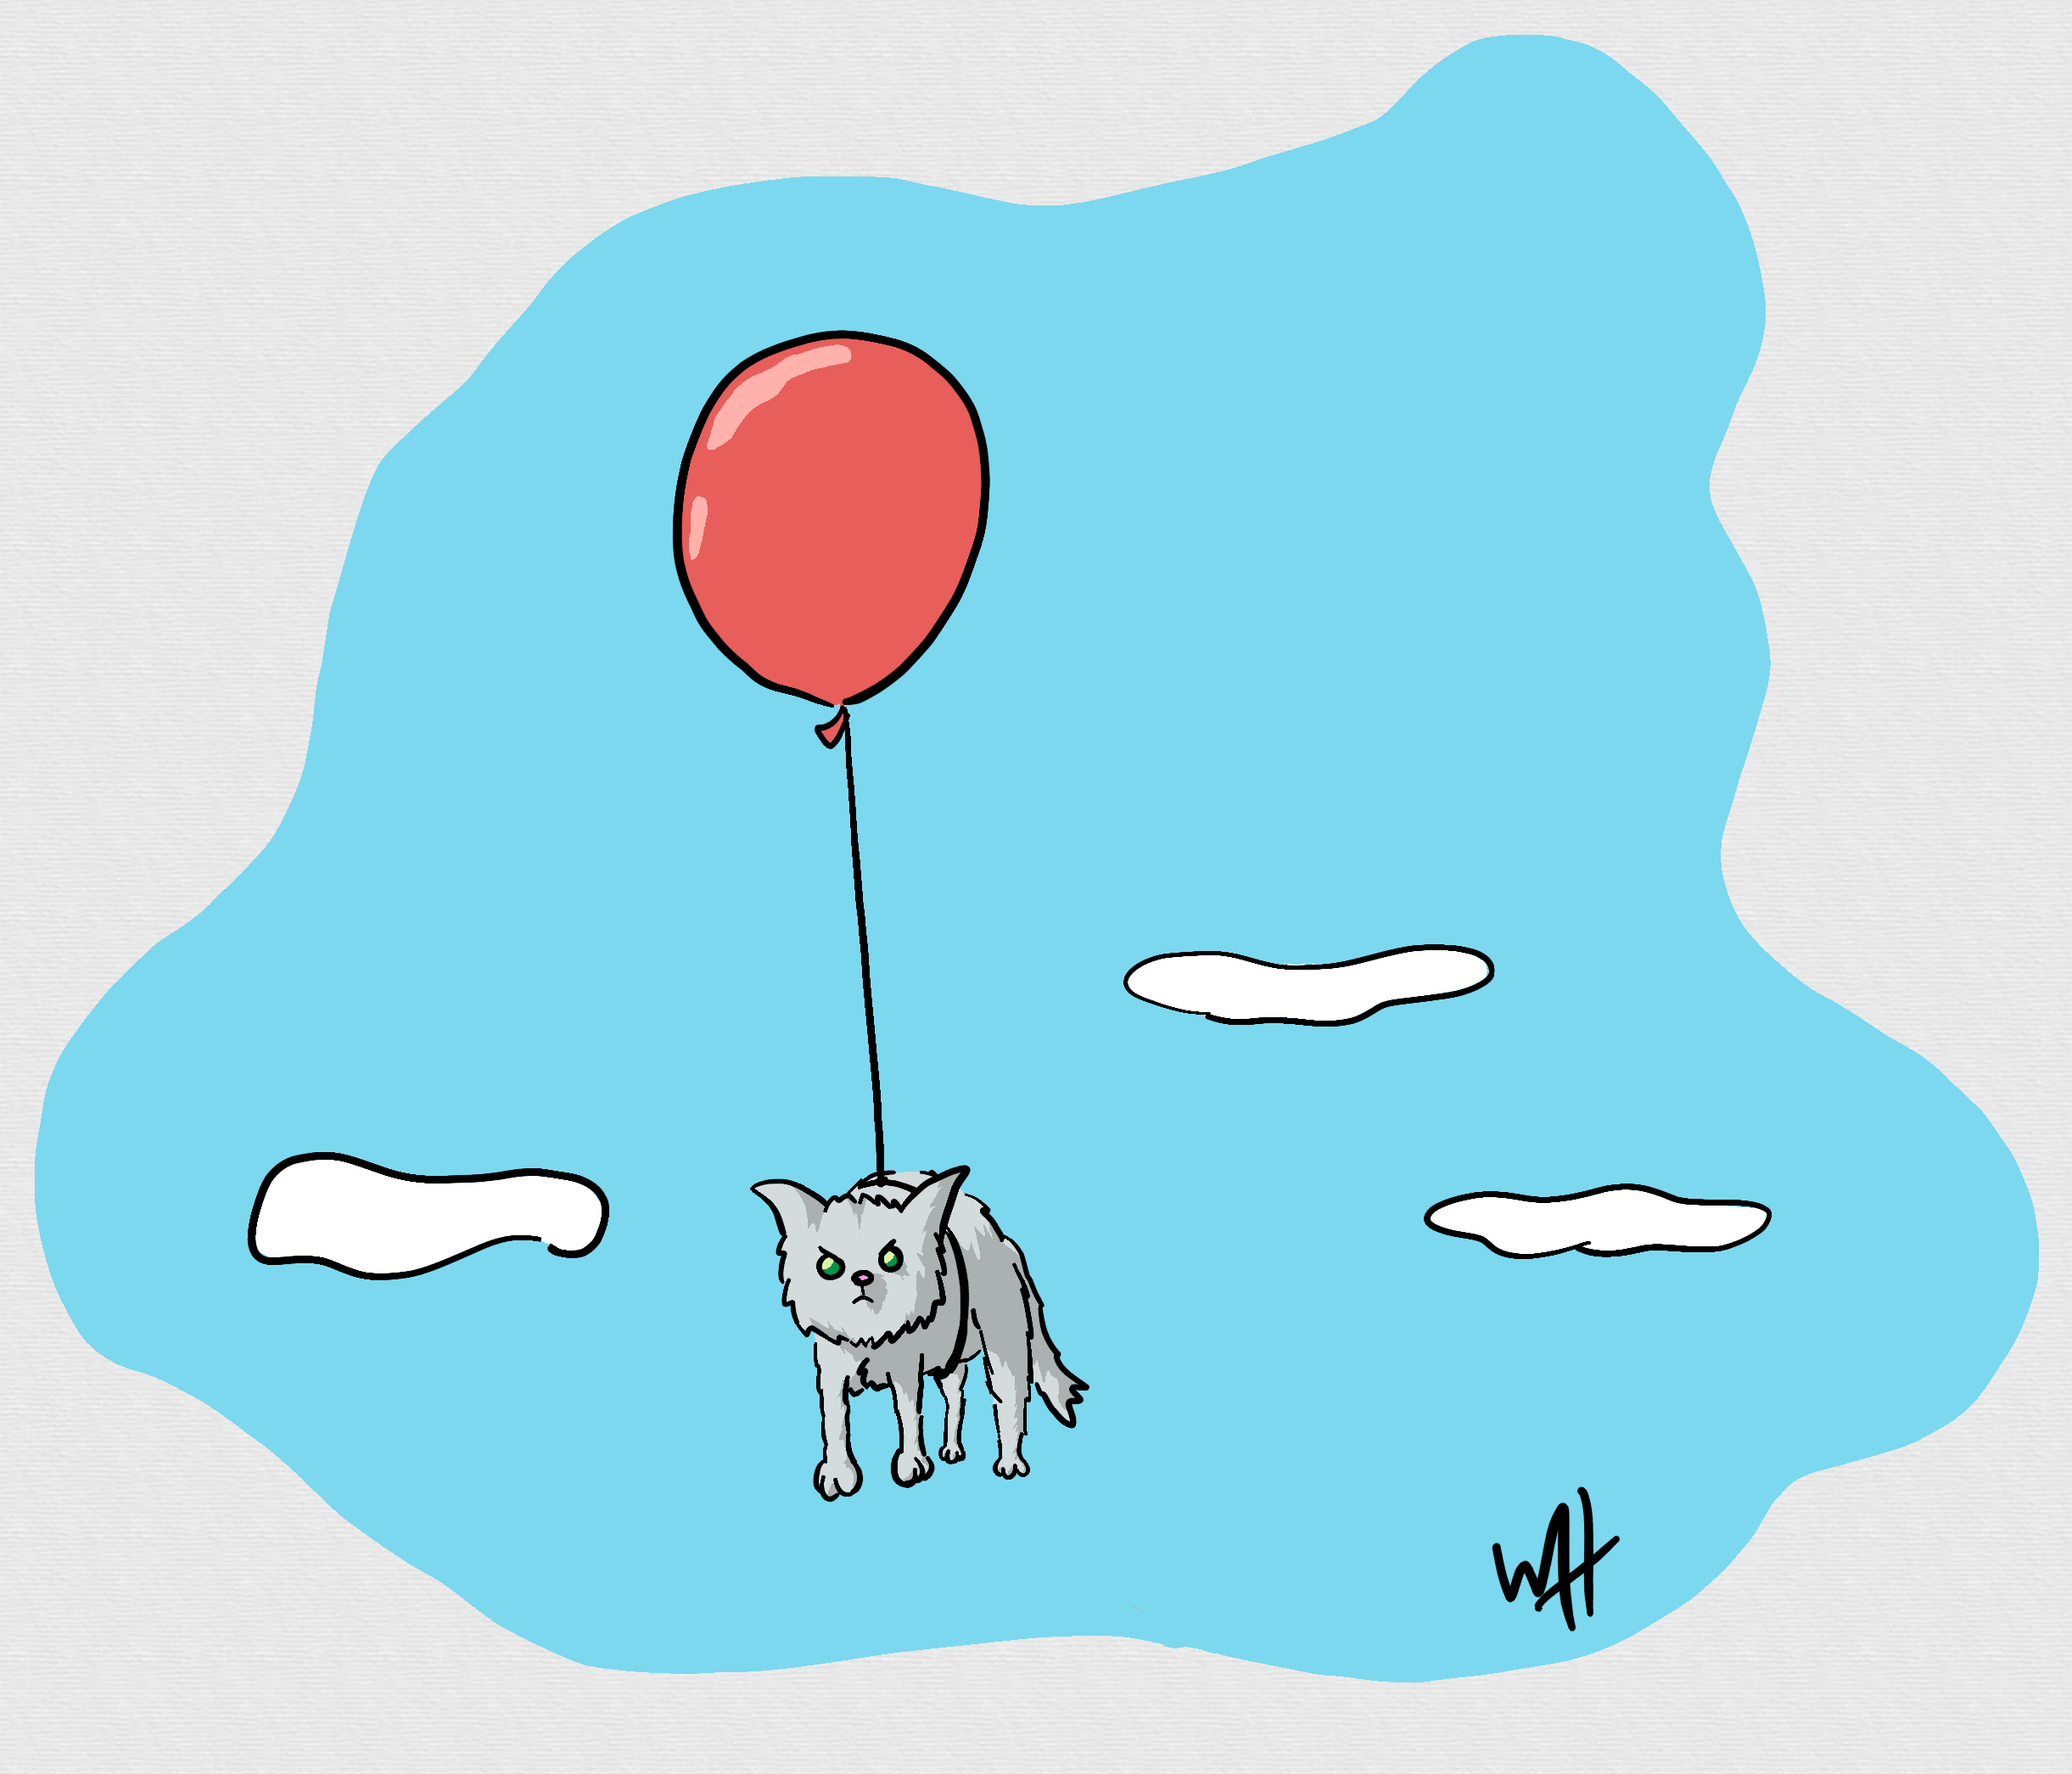 Inktober prompt: Rise. A drawing of a grey cat with a string tied around it. The string is attached to a red balloon and the cat is floating in the sky among the clouds.